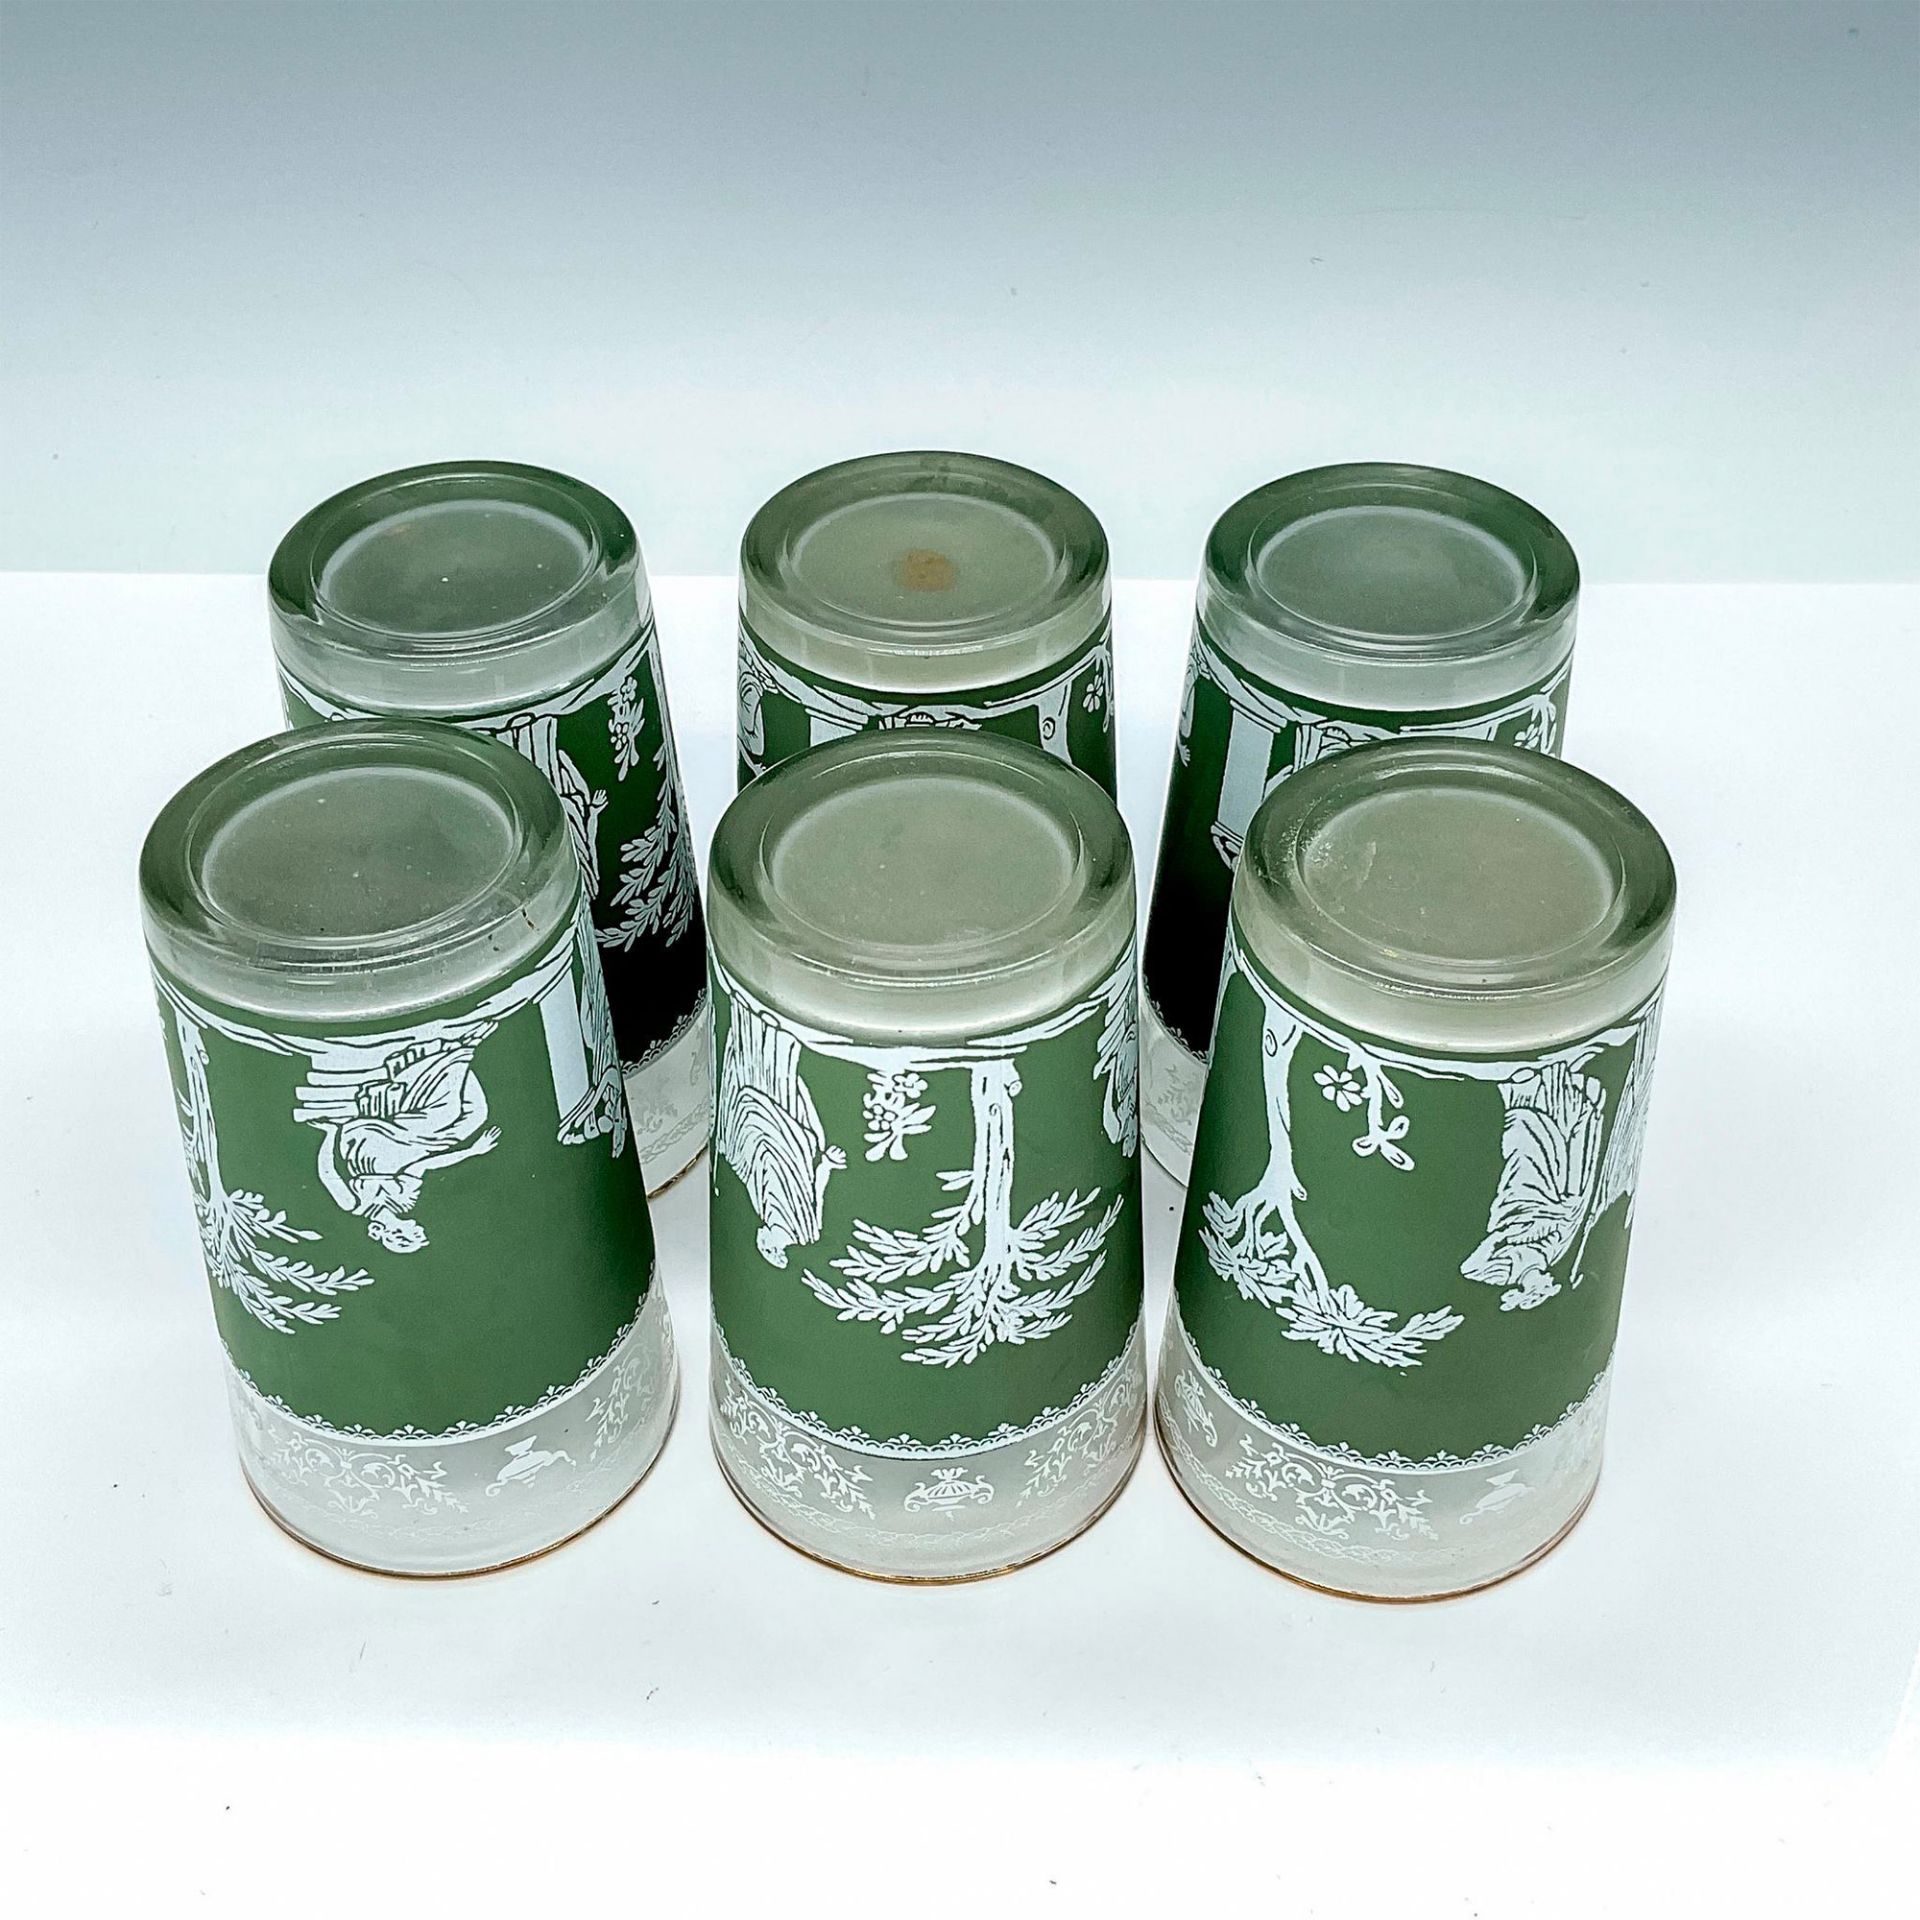 6pc Jeanette Juice Glasses, Hellenic Green - Image 3 of 3